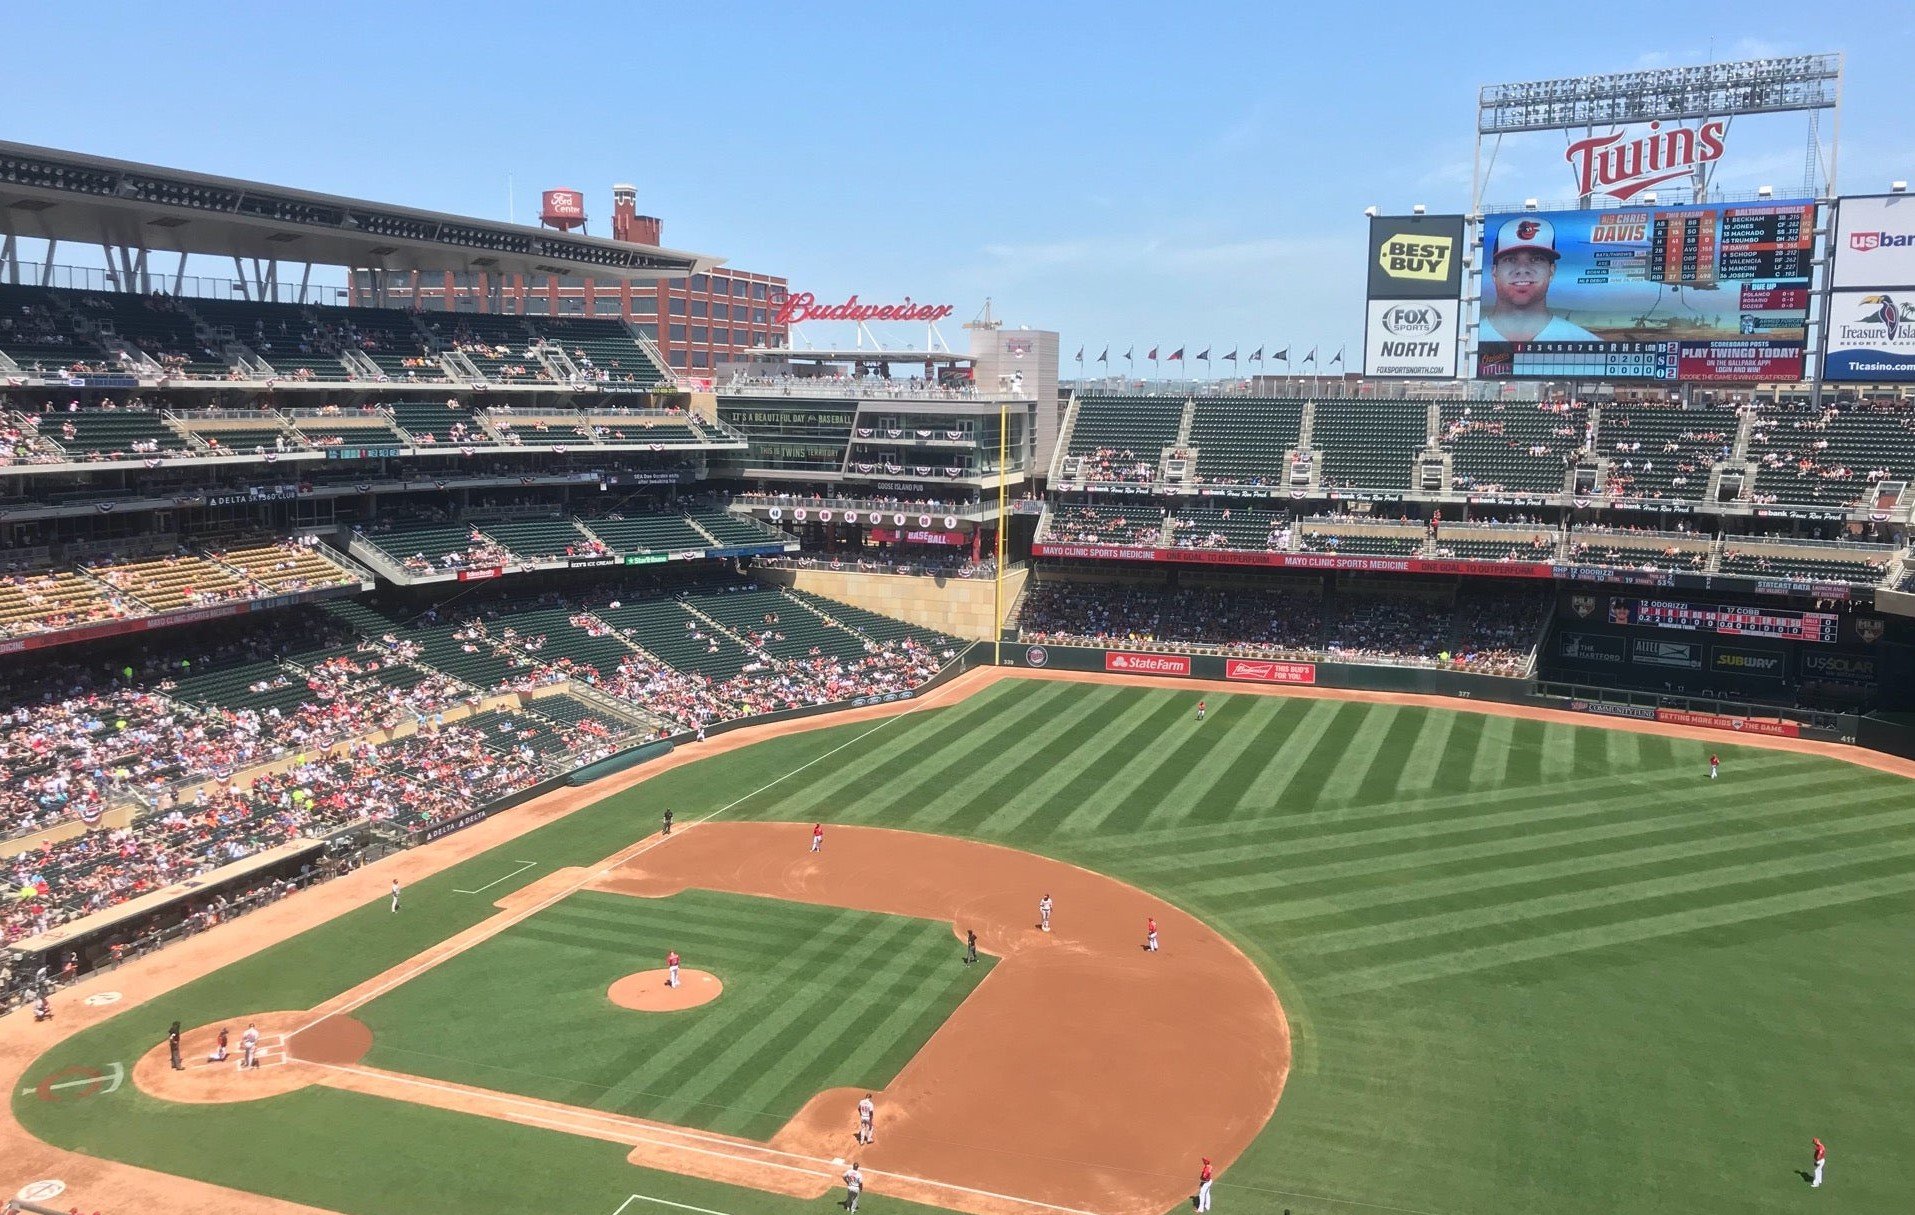 Target Field Seating Chart With Rows And Seat Numbers Two Birds Home